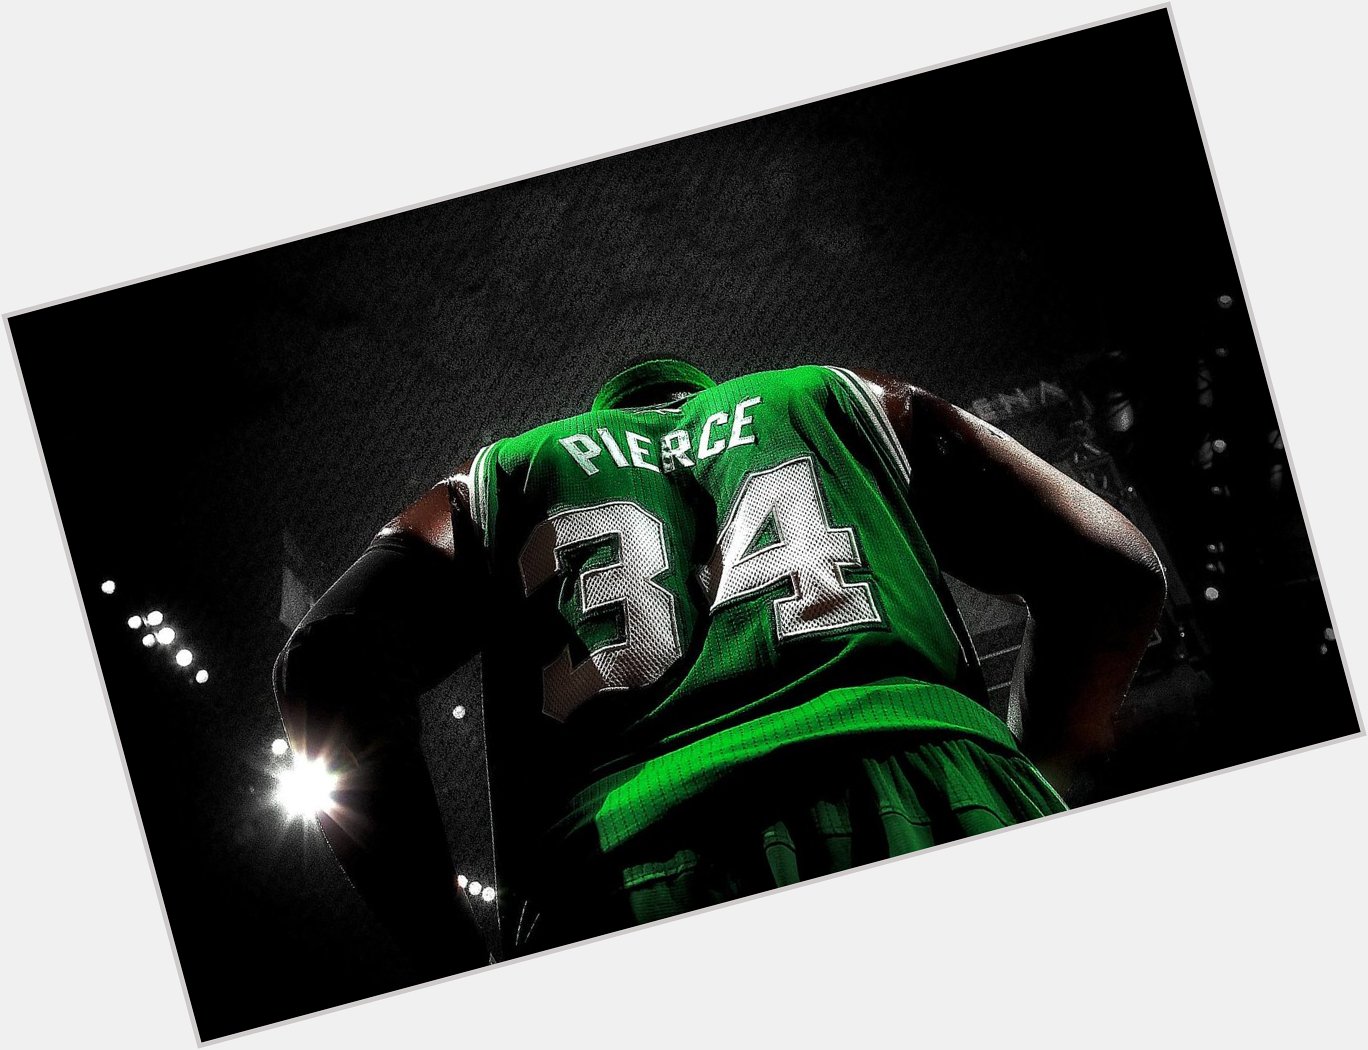 HAPPY BIRTHDAY 34.
Best wishes for you, PAUL PIERCE.

OH CAPTAIN! OH OH MY CAPTAIN! OH OH  